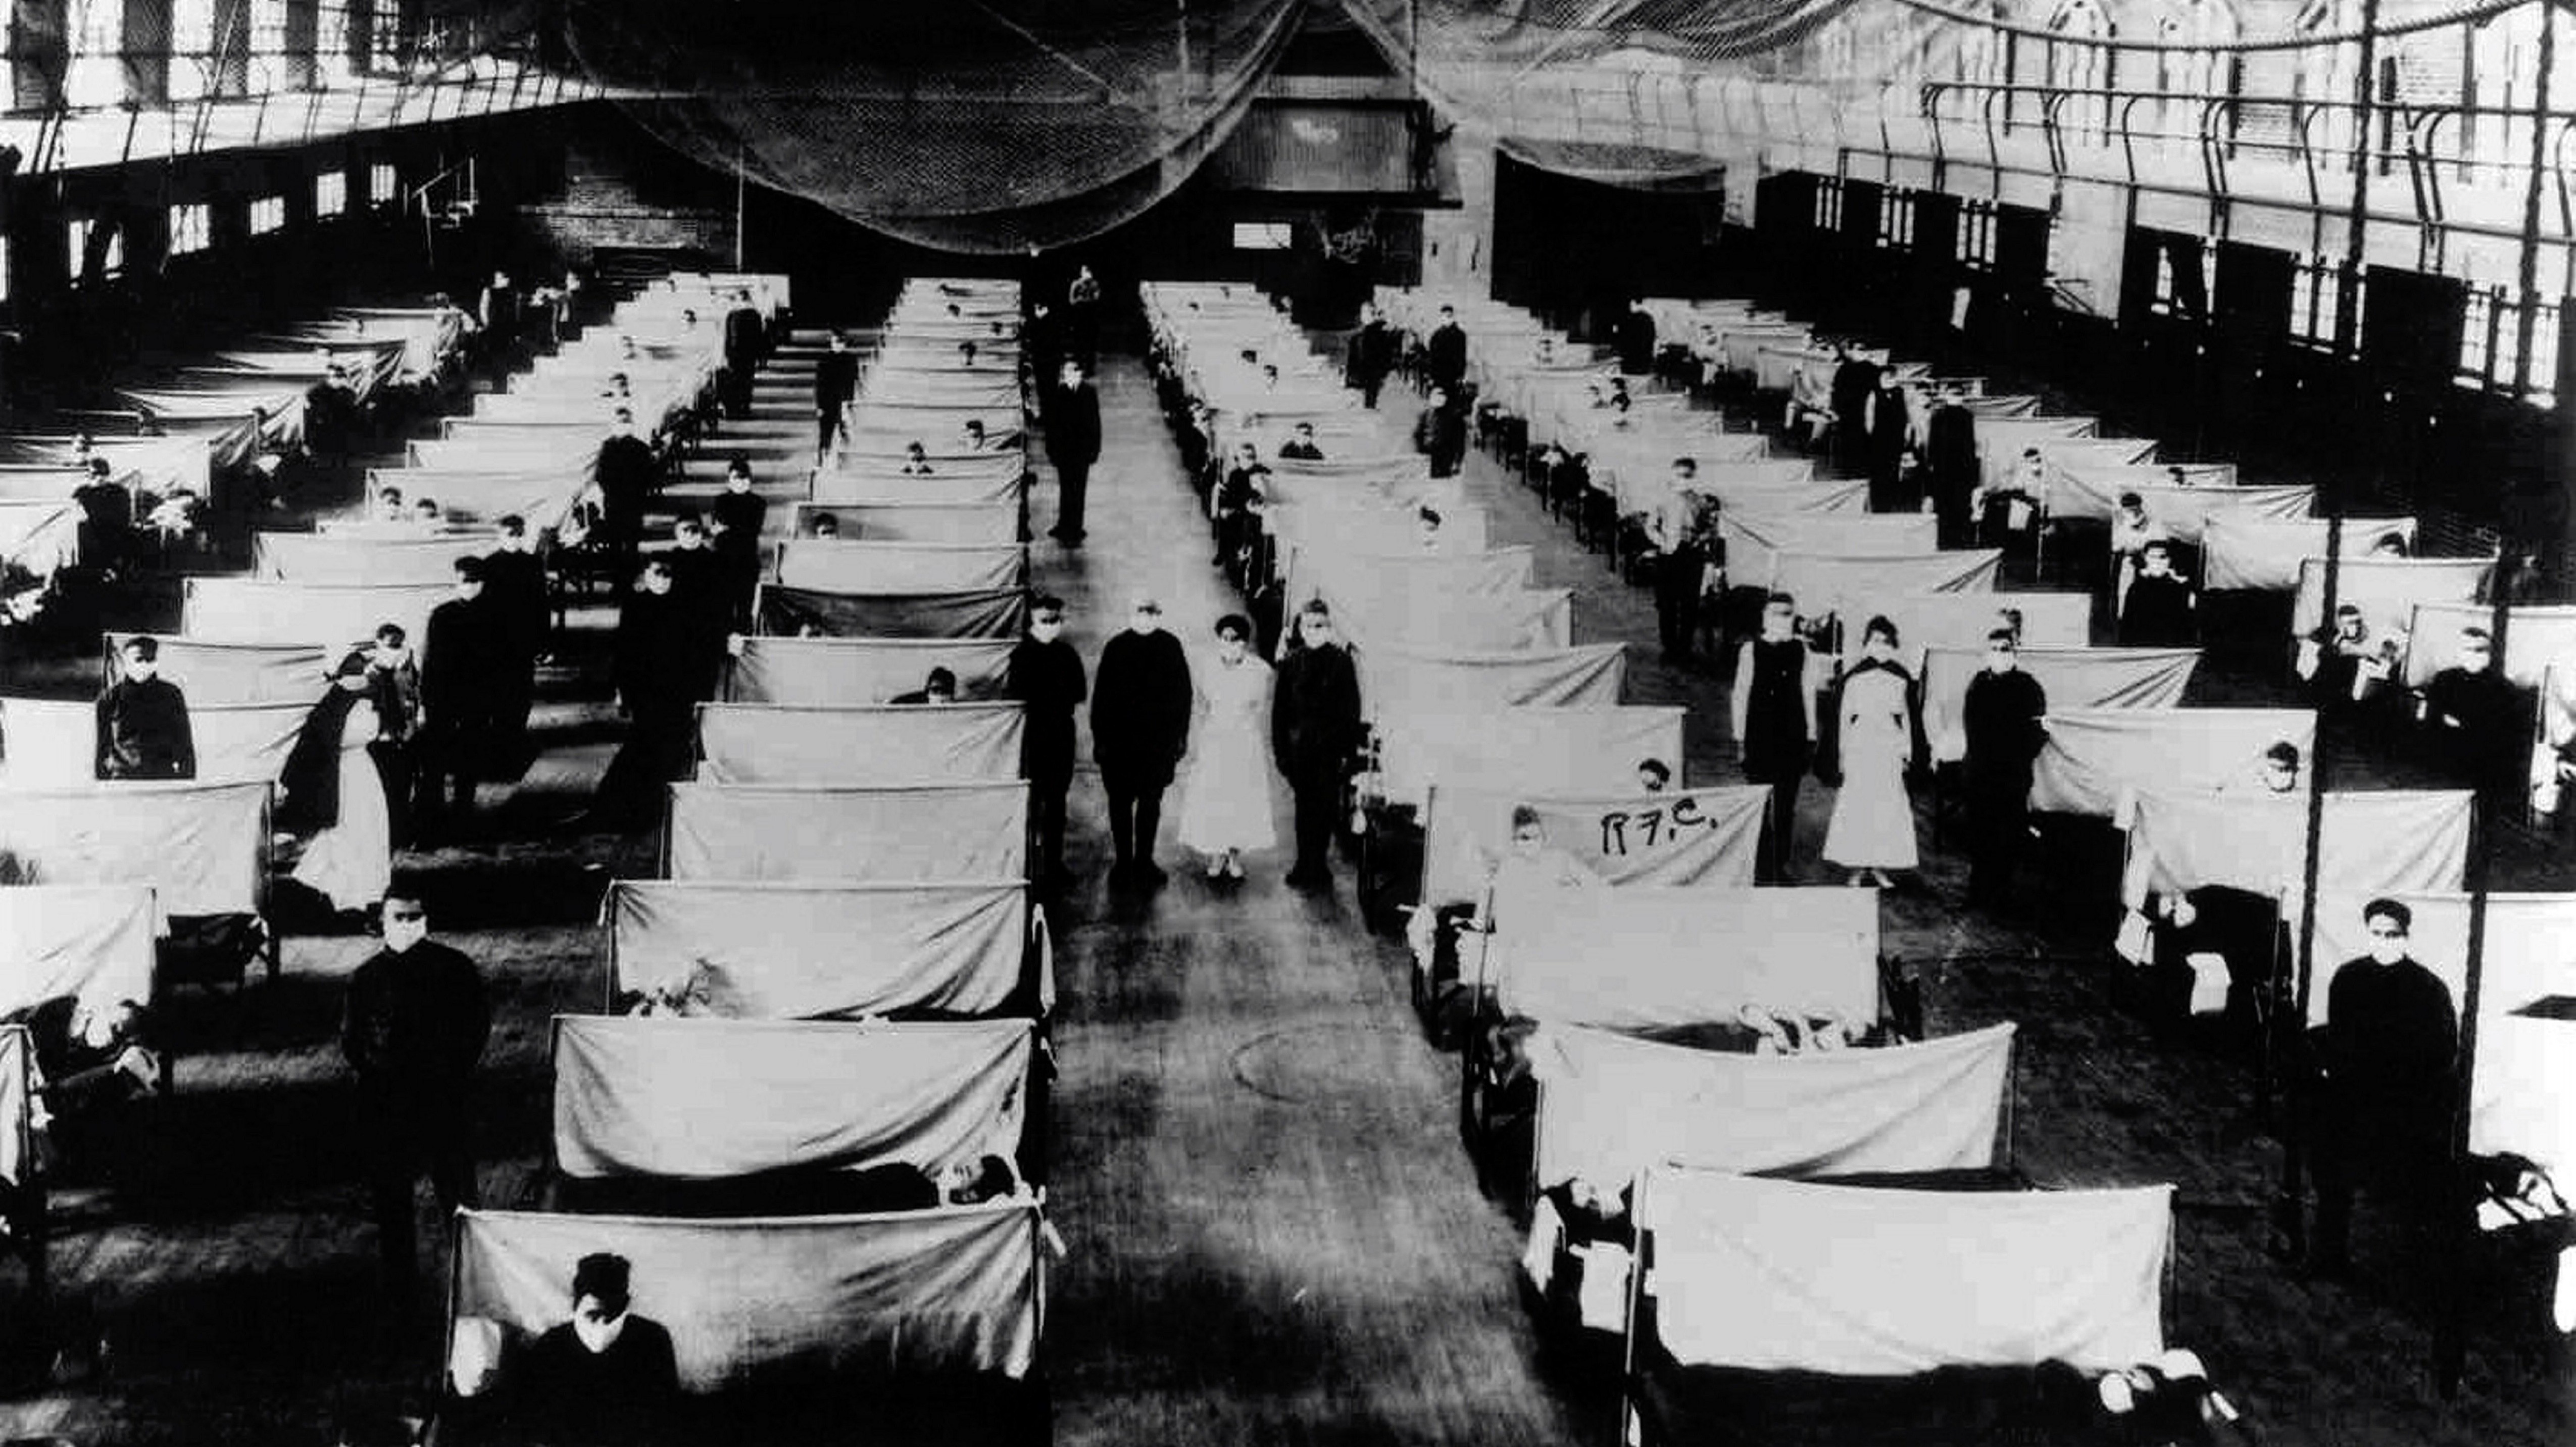 Estimates of global deaths from the flu in 1919 range from around 30 million to 100 million. Photo: Handout